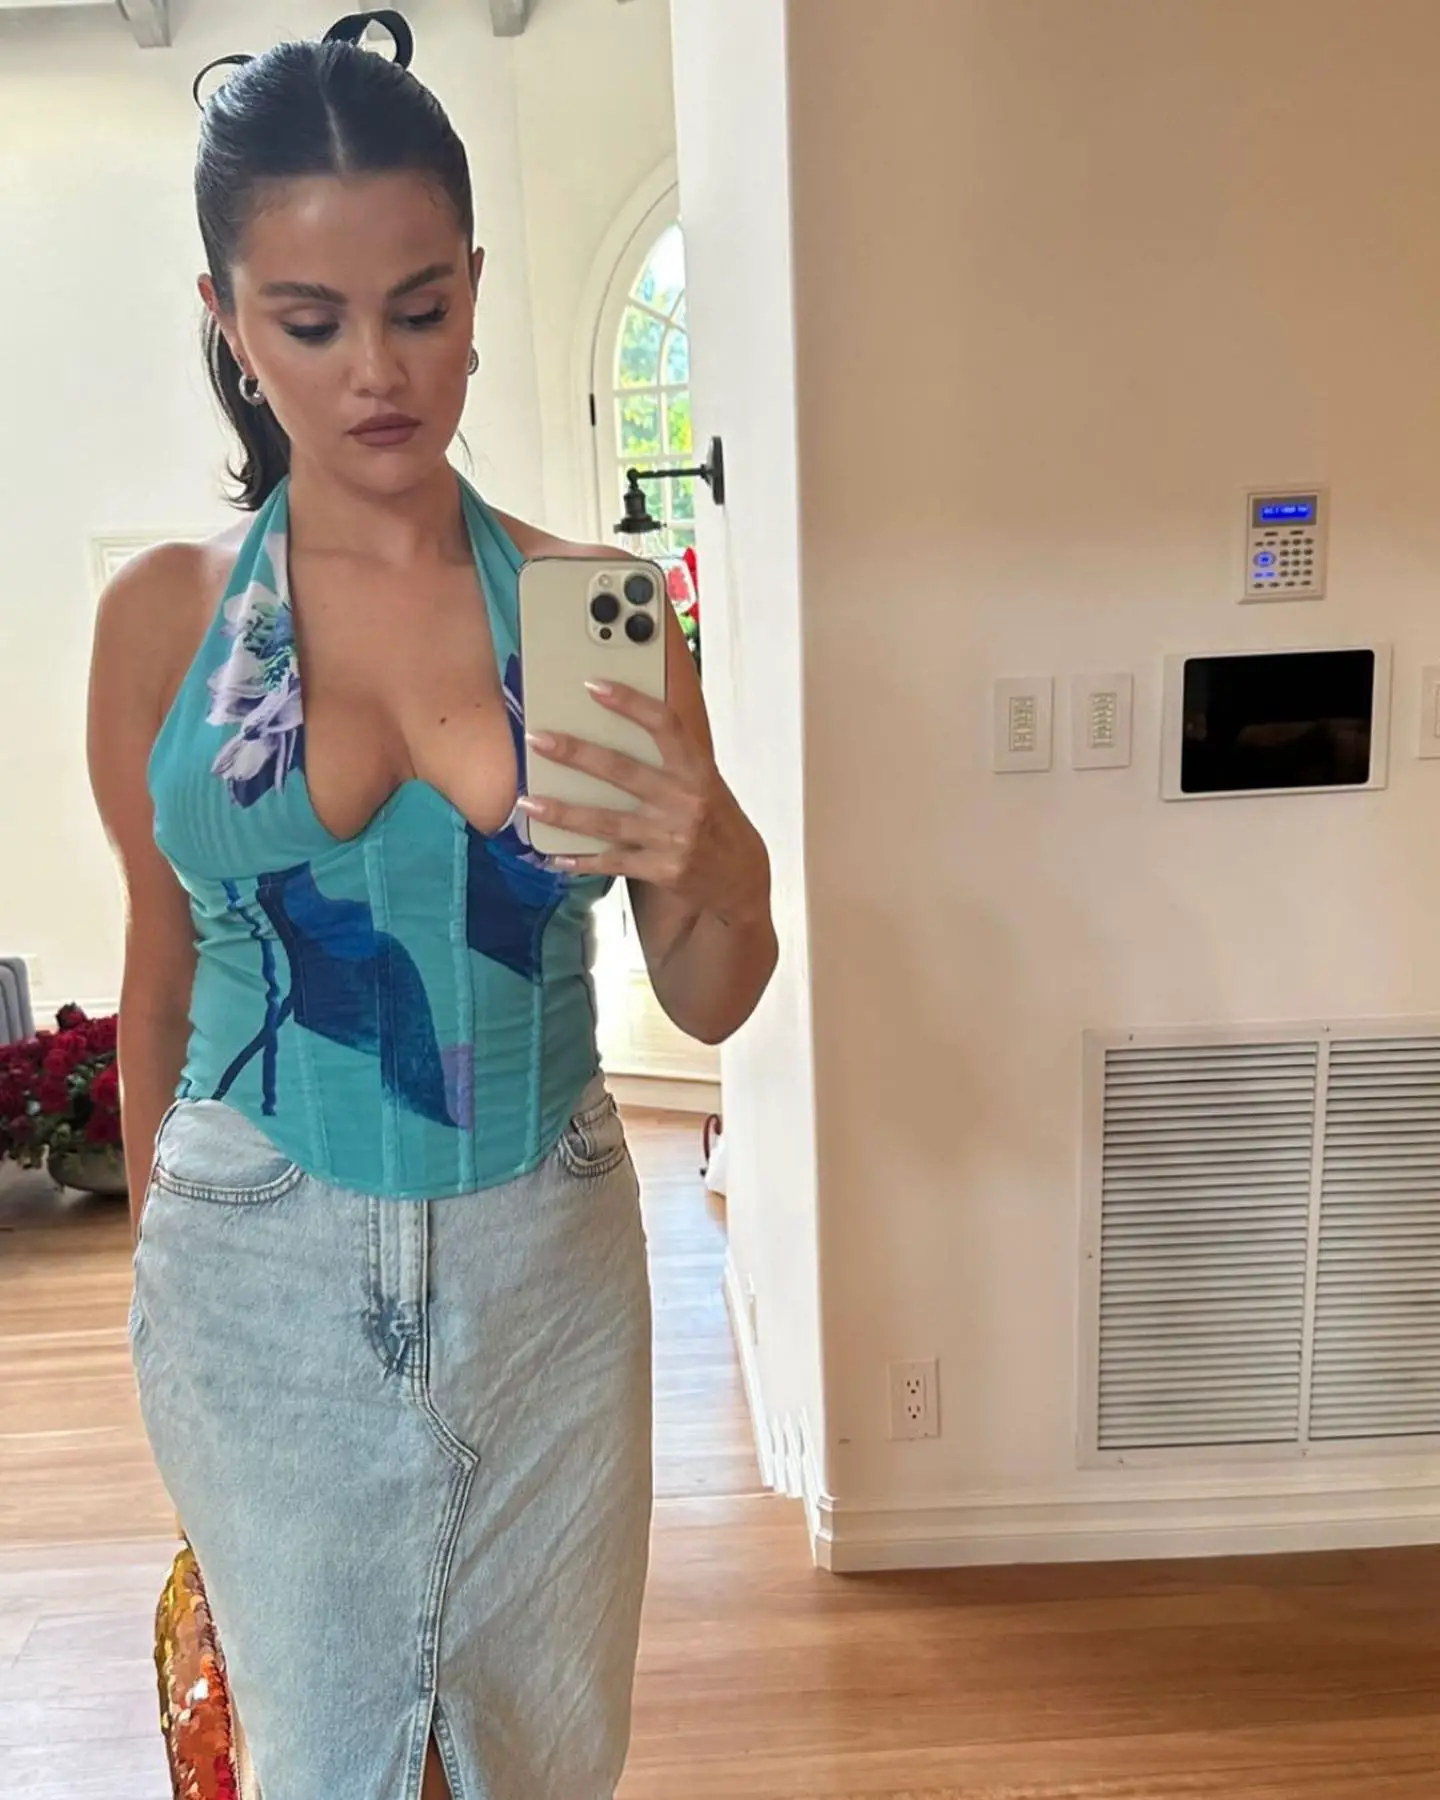 #SelenaGomez posed for the ‘Gram wearing a $245 @miaou top. Hot! or Hmm..? IG/Re